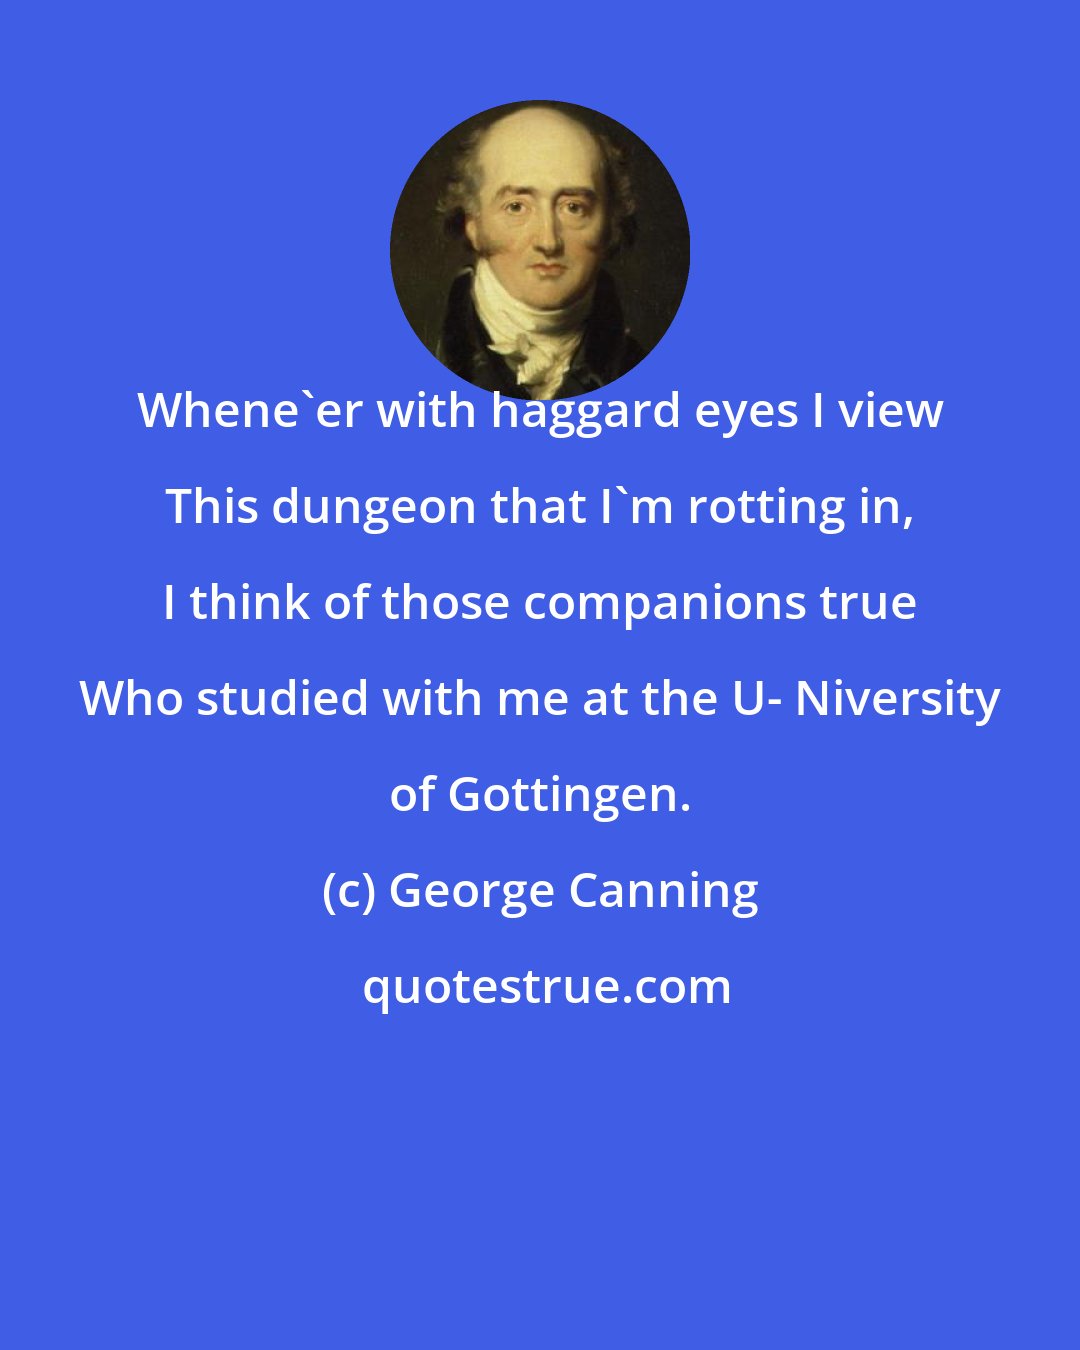 George Canning: Whene'er with haggard eyes I view This dungeon that I'm rotting in, I think of those companions true Who studied with me at the U- Niversity of Gottingen.